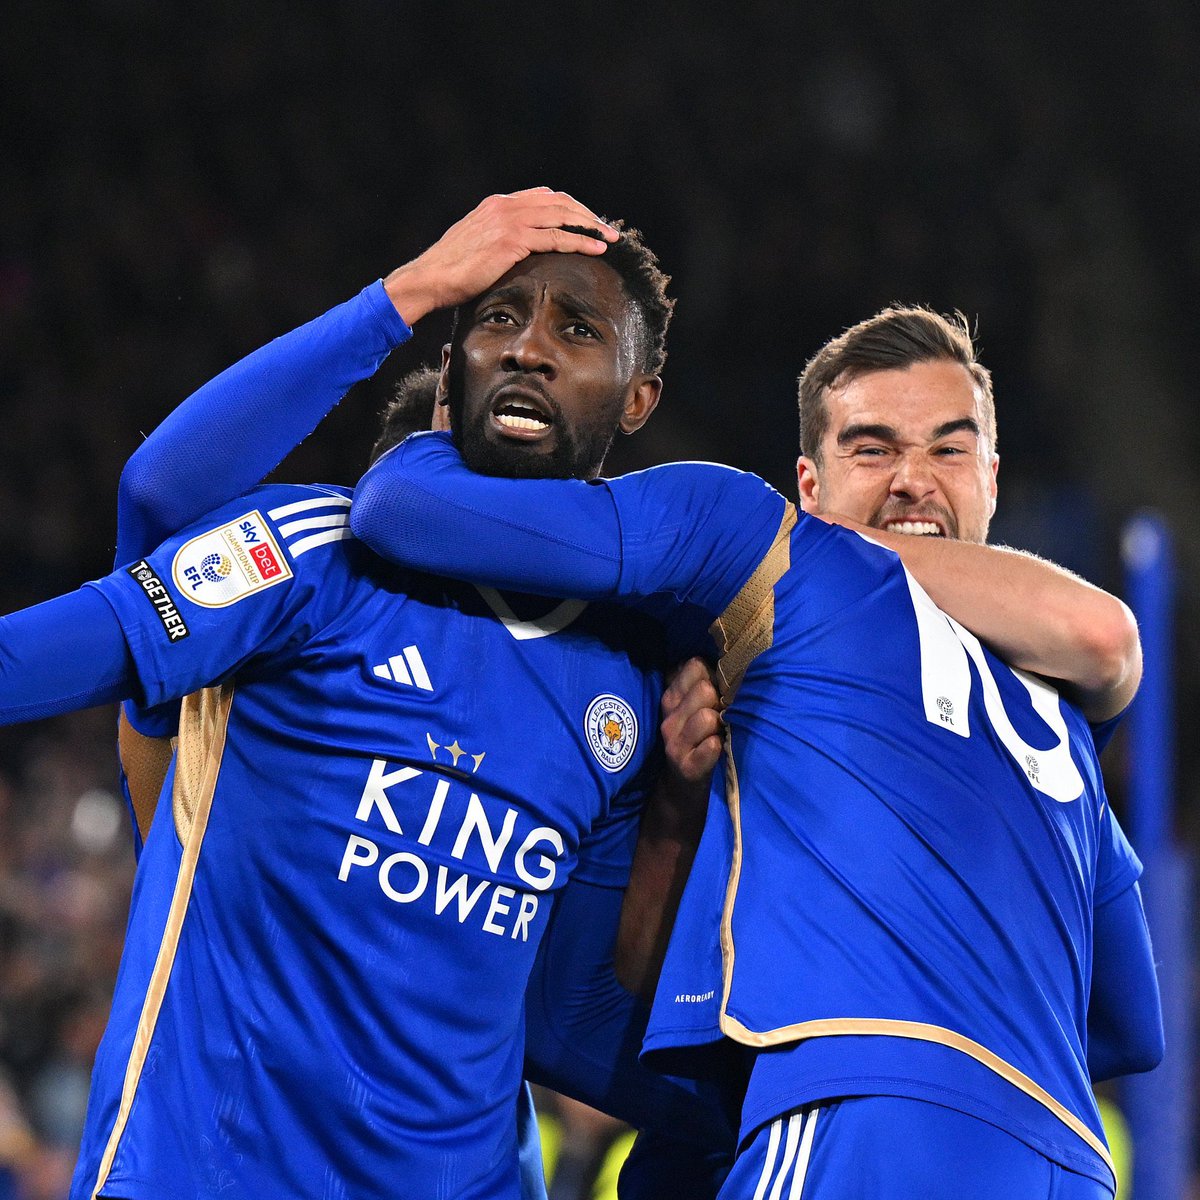 Wilfred Ndidi scores for Leicester City as they breeze past Joe Aribo’s Southampton in the #EFL Championship.

They now sit on top of the league table with two games left to play.

#LEISOU